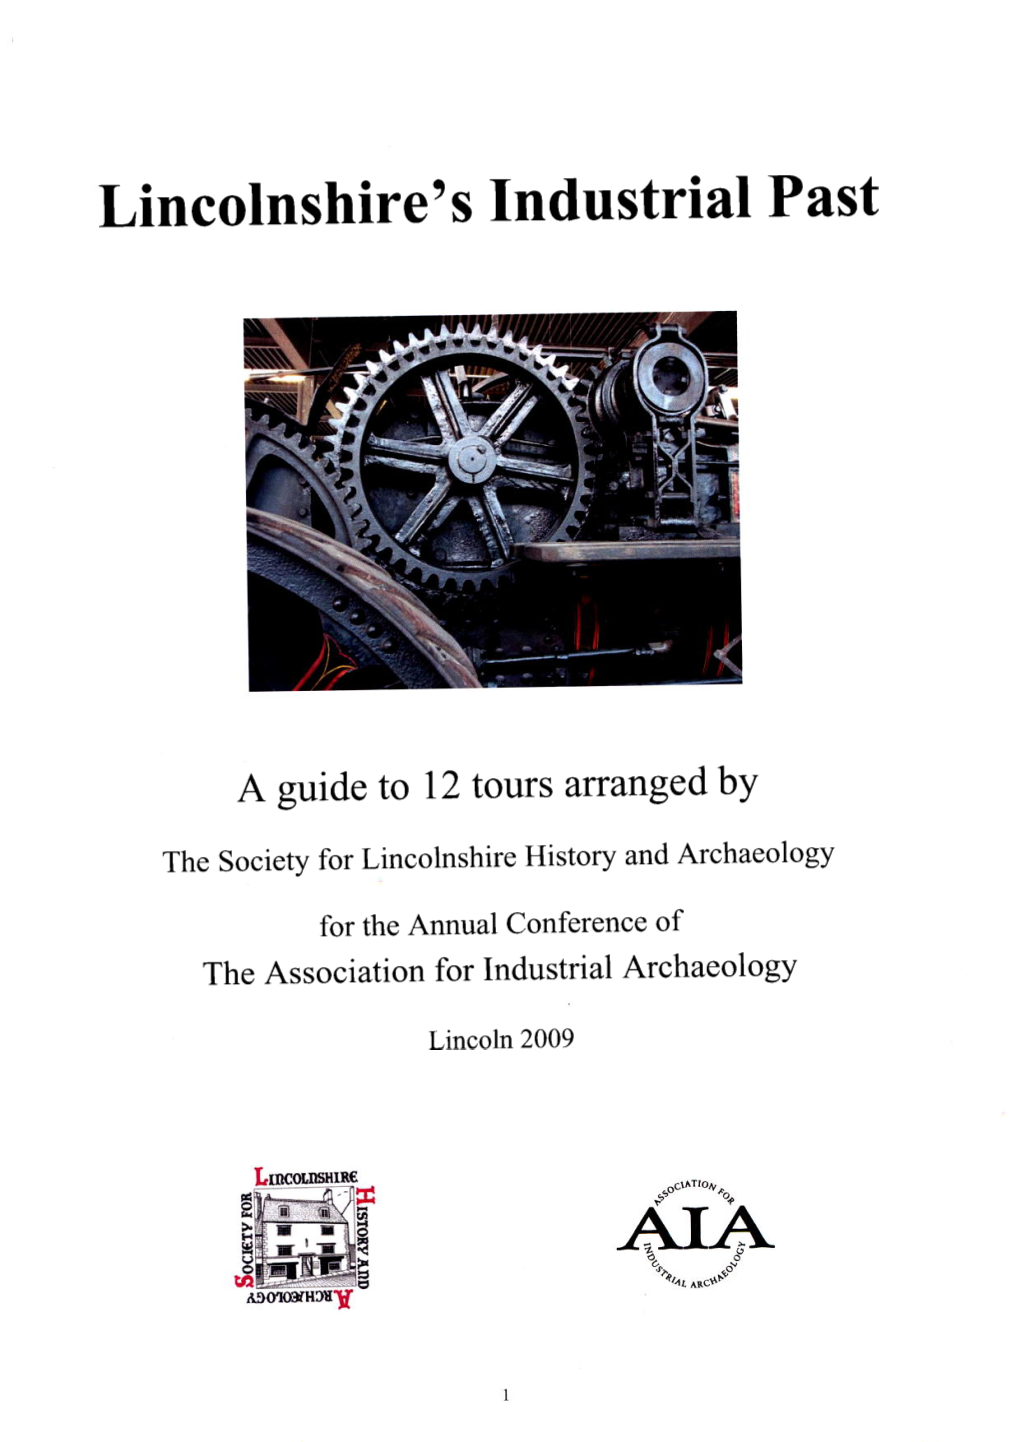 Lincolnshire's Industrial Past